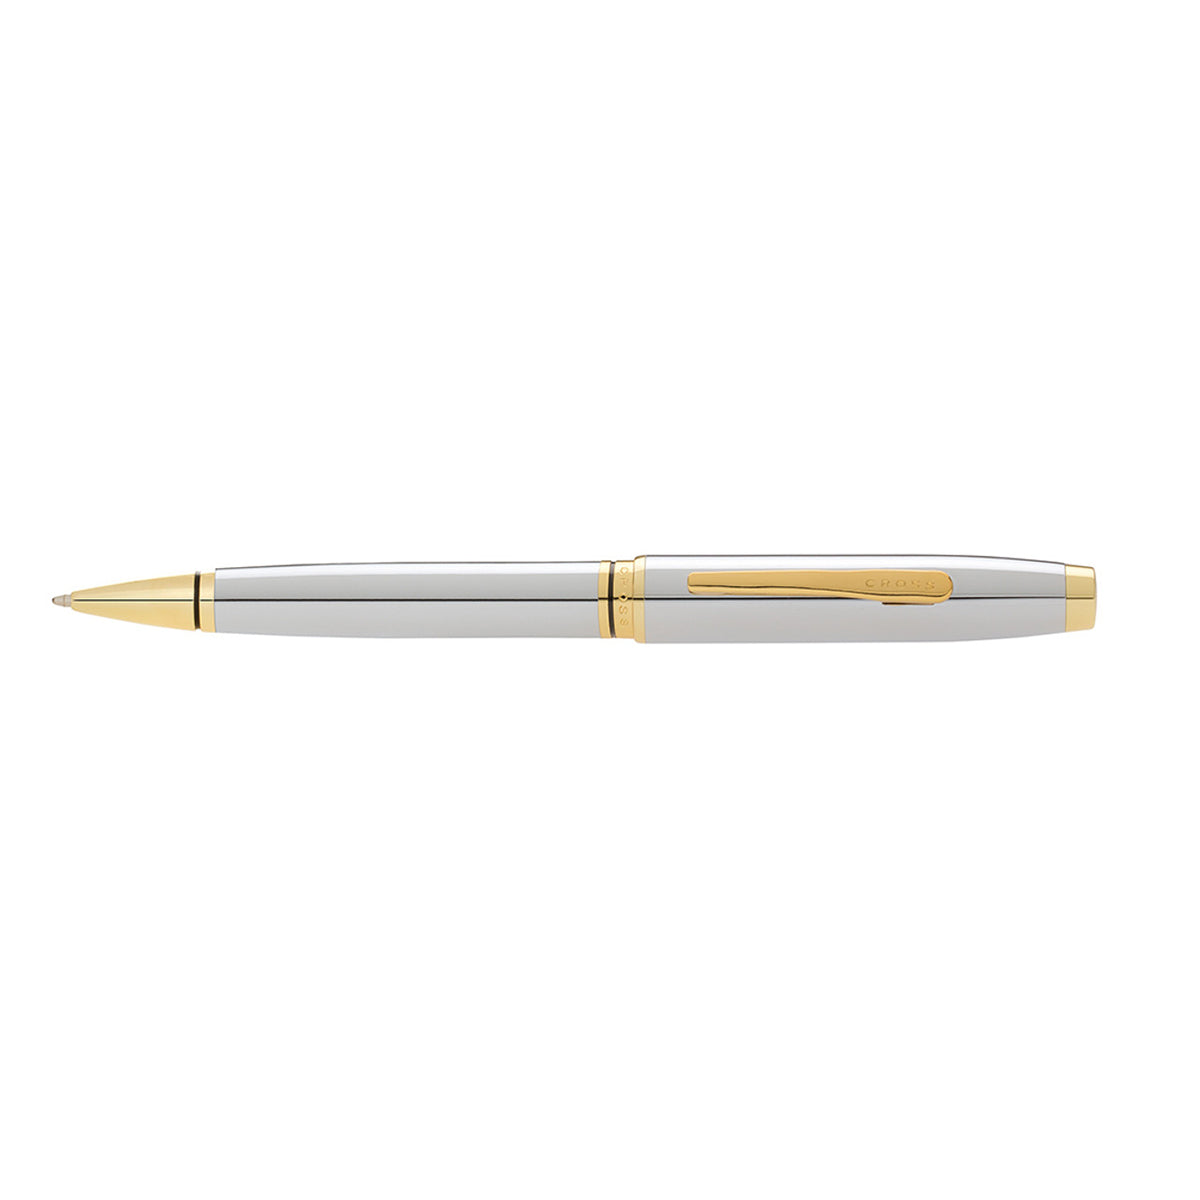 Cross Coventry Pen Ballpoint Polished Chrome Gold Trim AT0662-2  Cross Fountain Pens